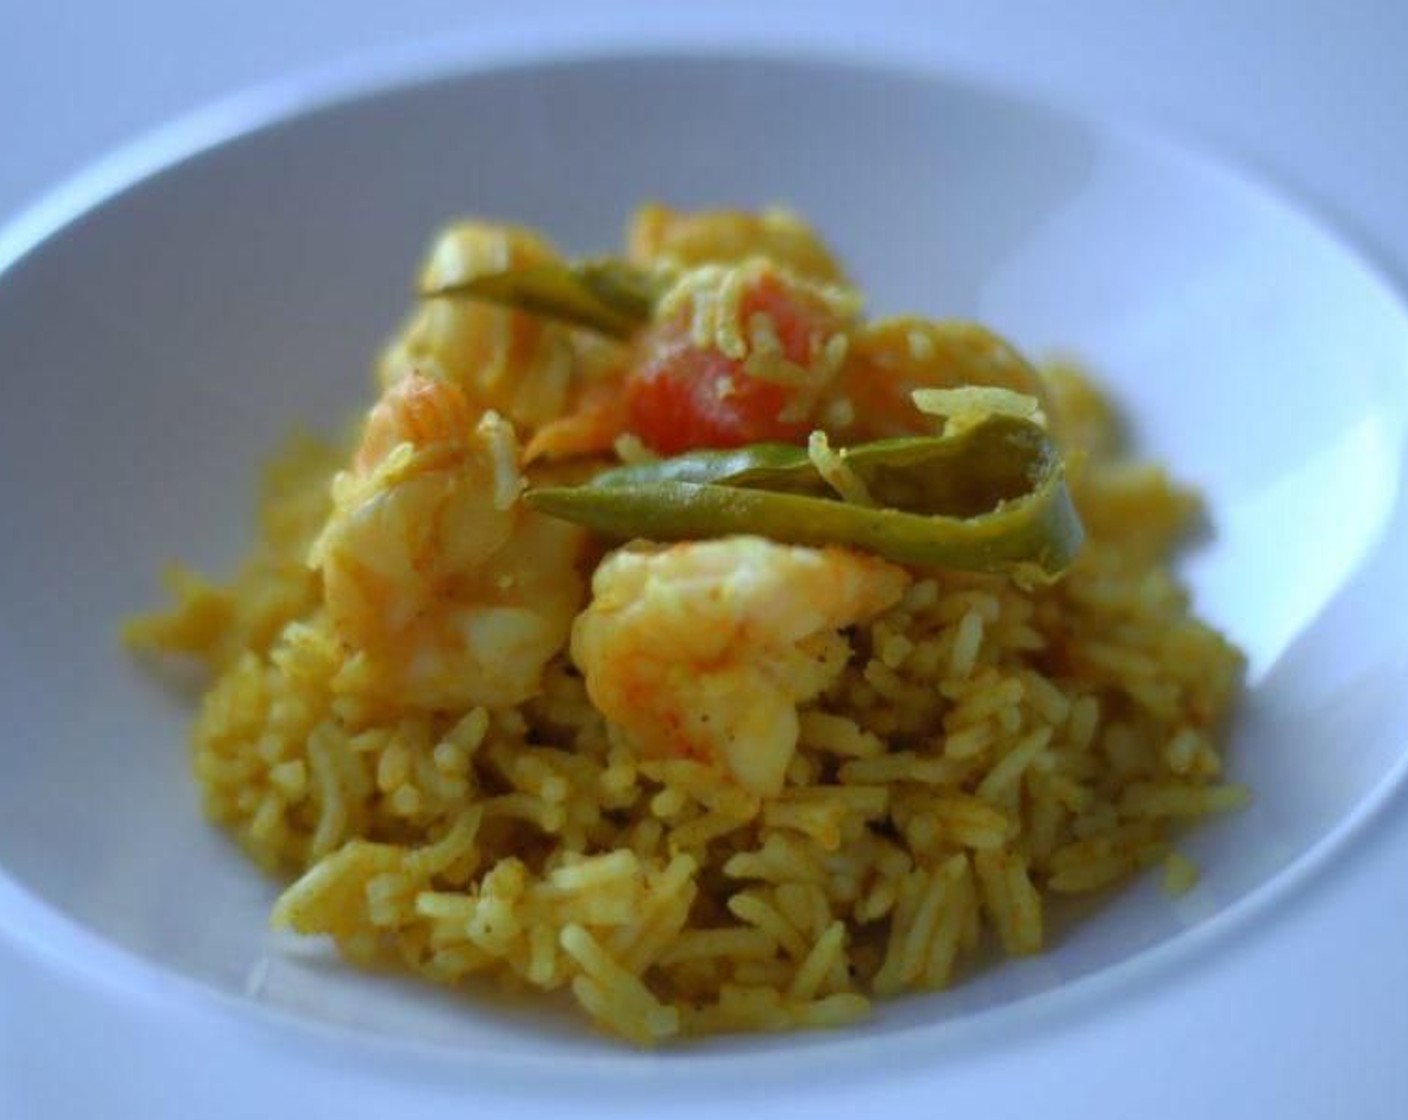 step 9 Serve by spooning the rice onto a plate and topping with the shrimp and peppers. Enjoy!